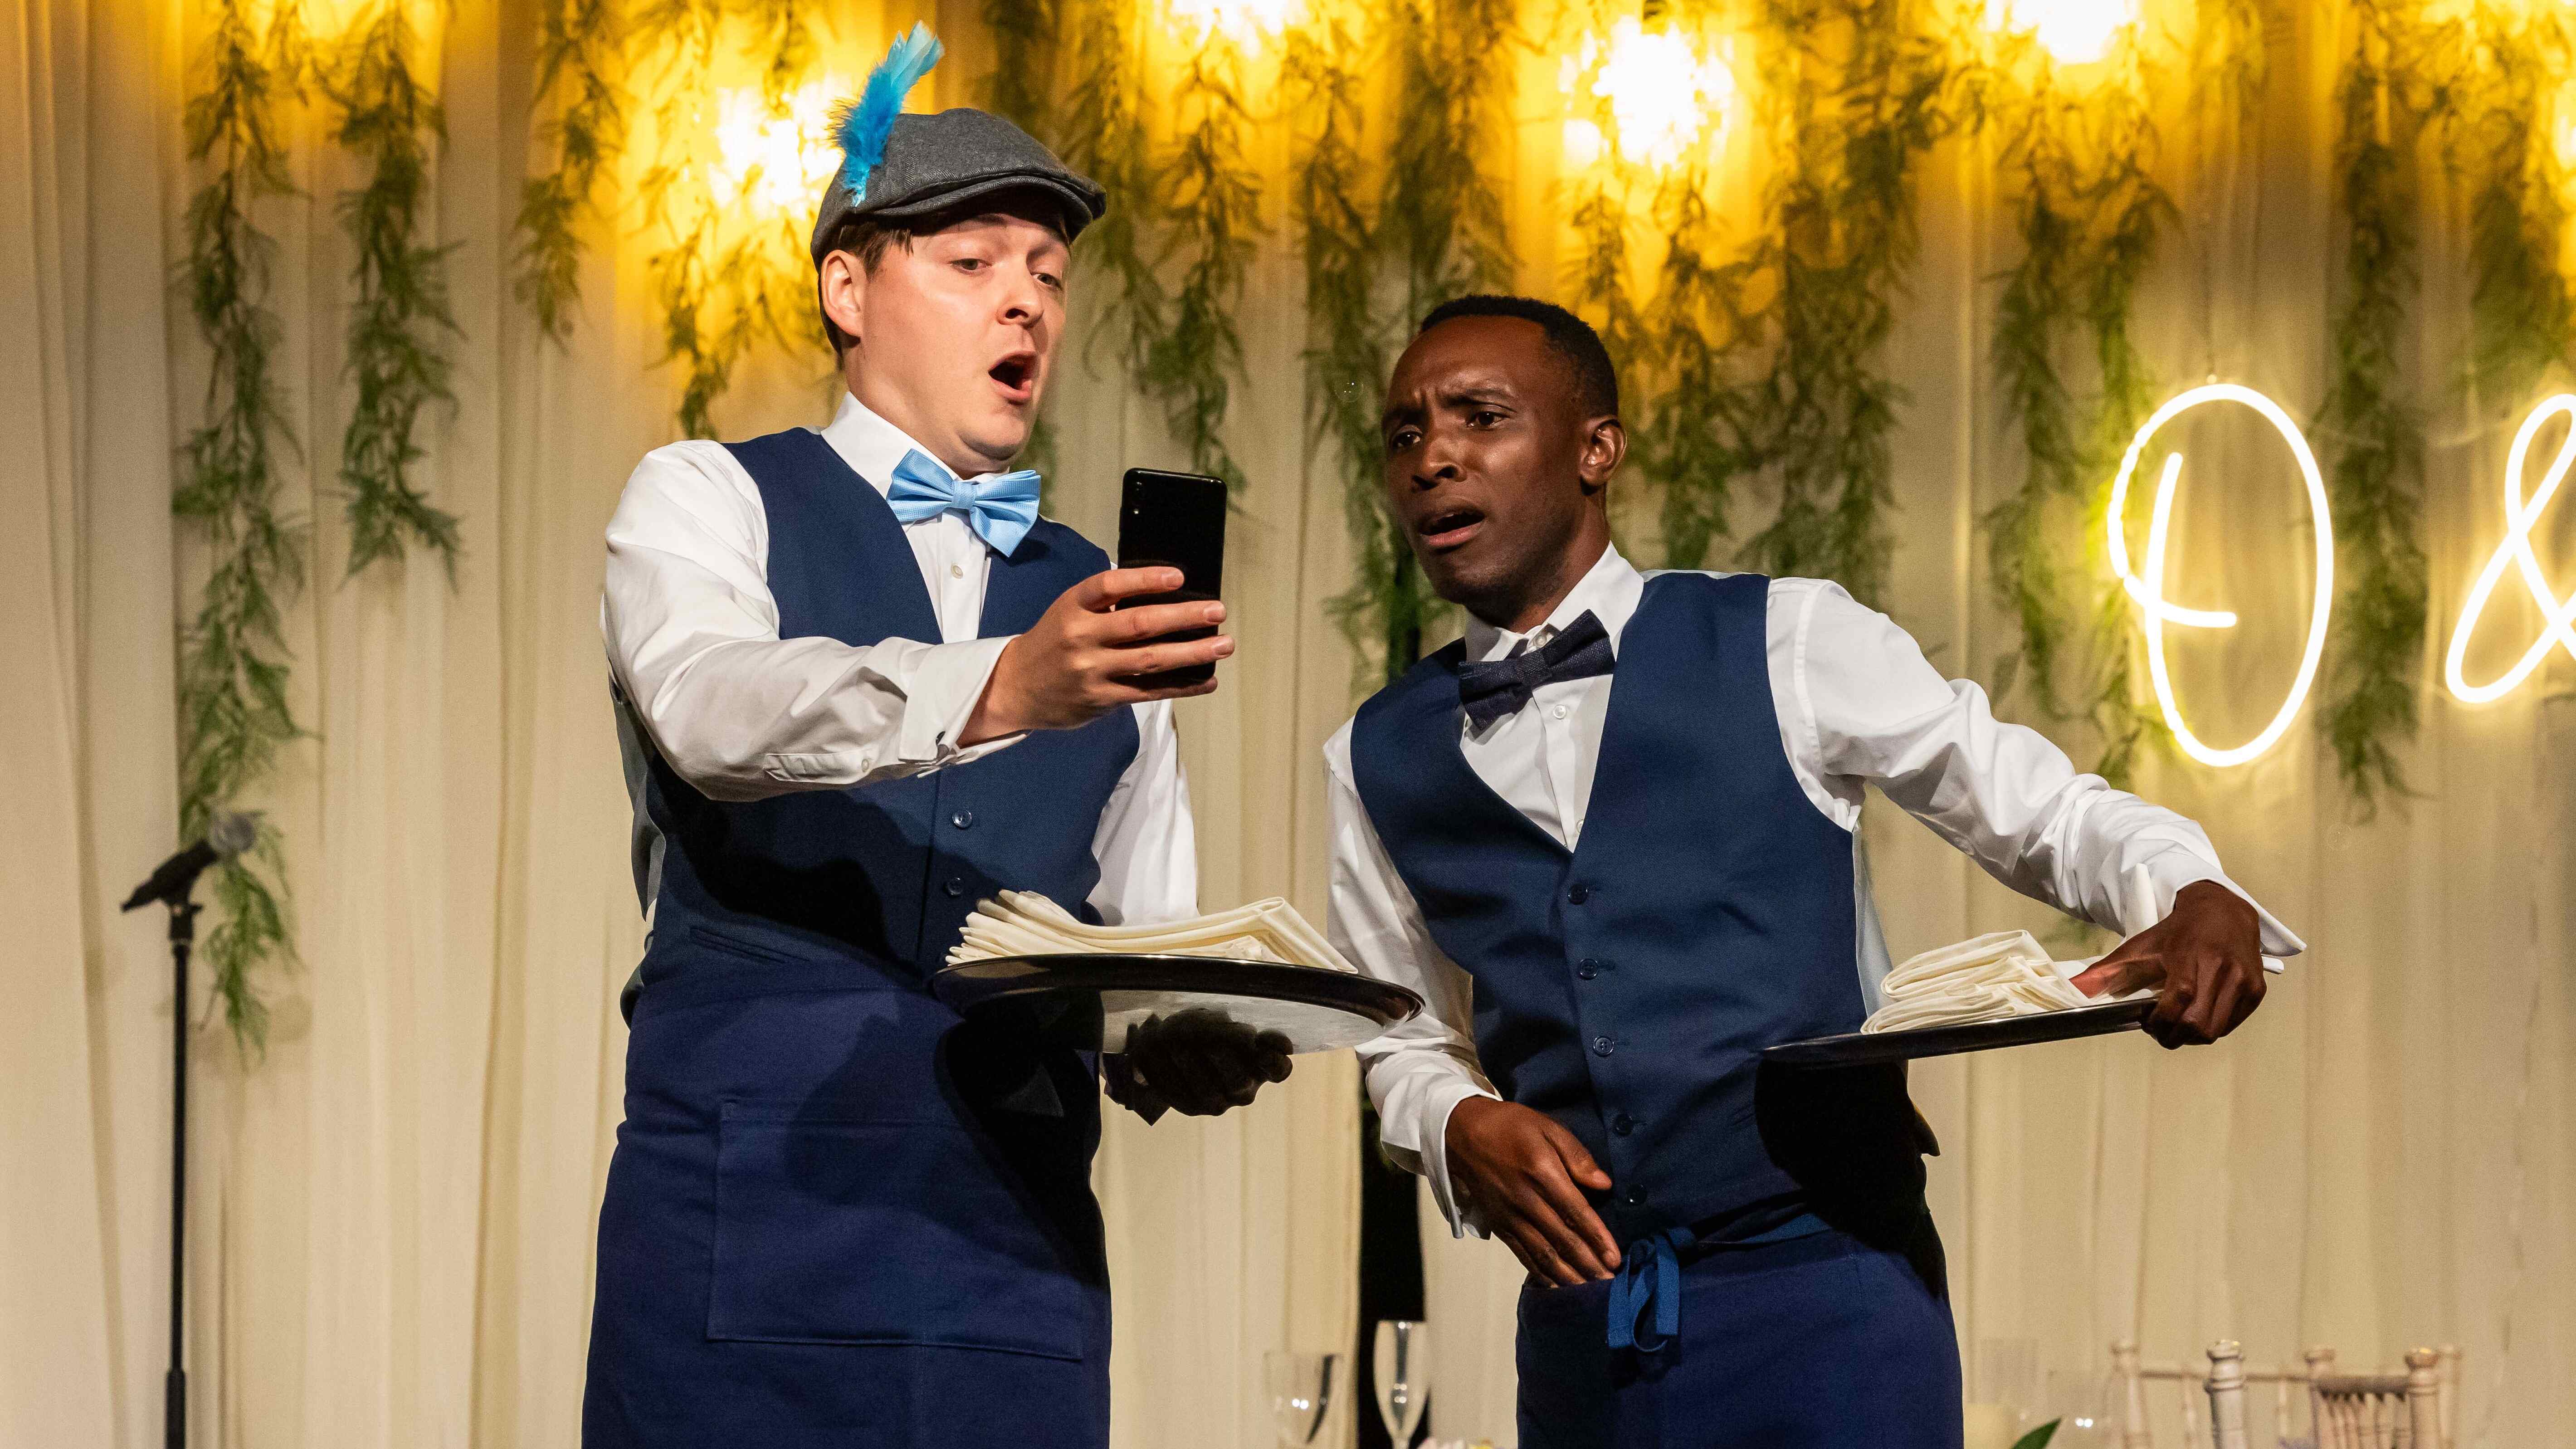 A white man shows his phone to a black man. Both are dressed as waiters.